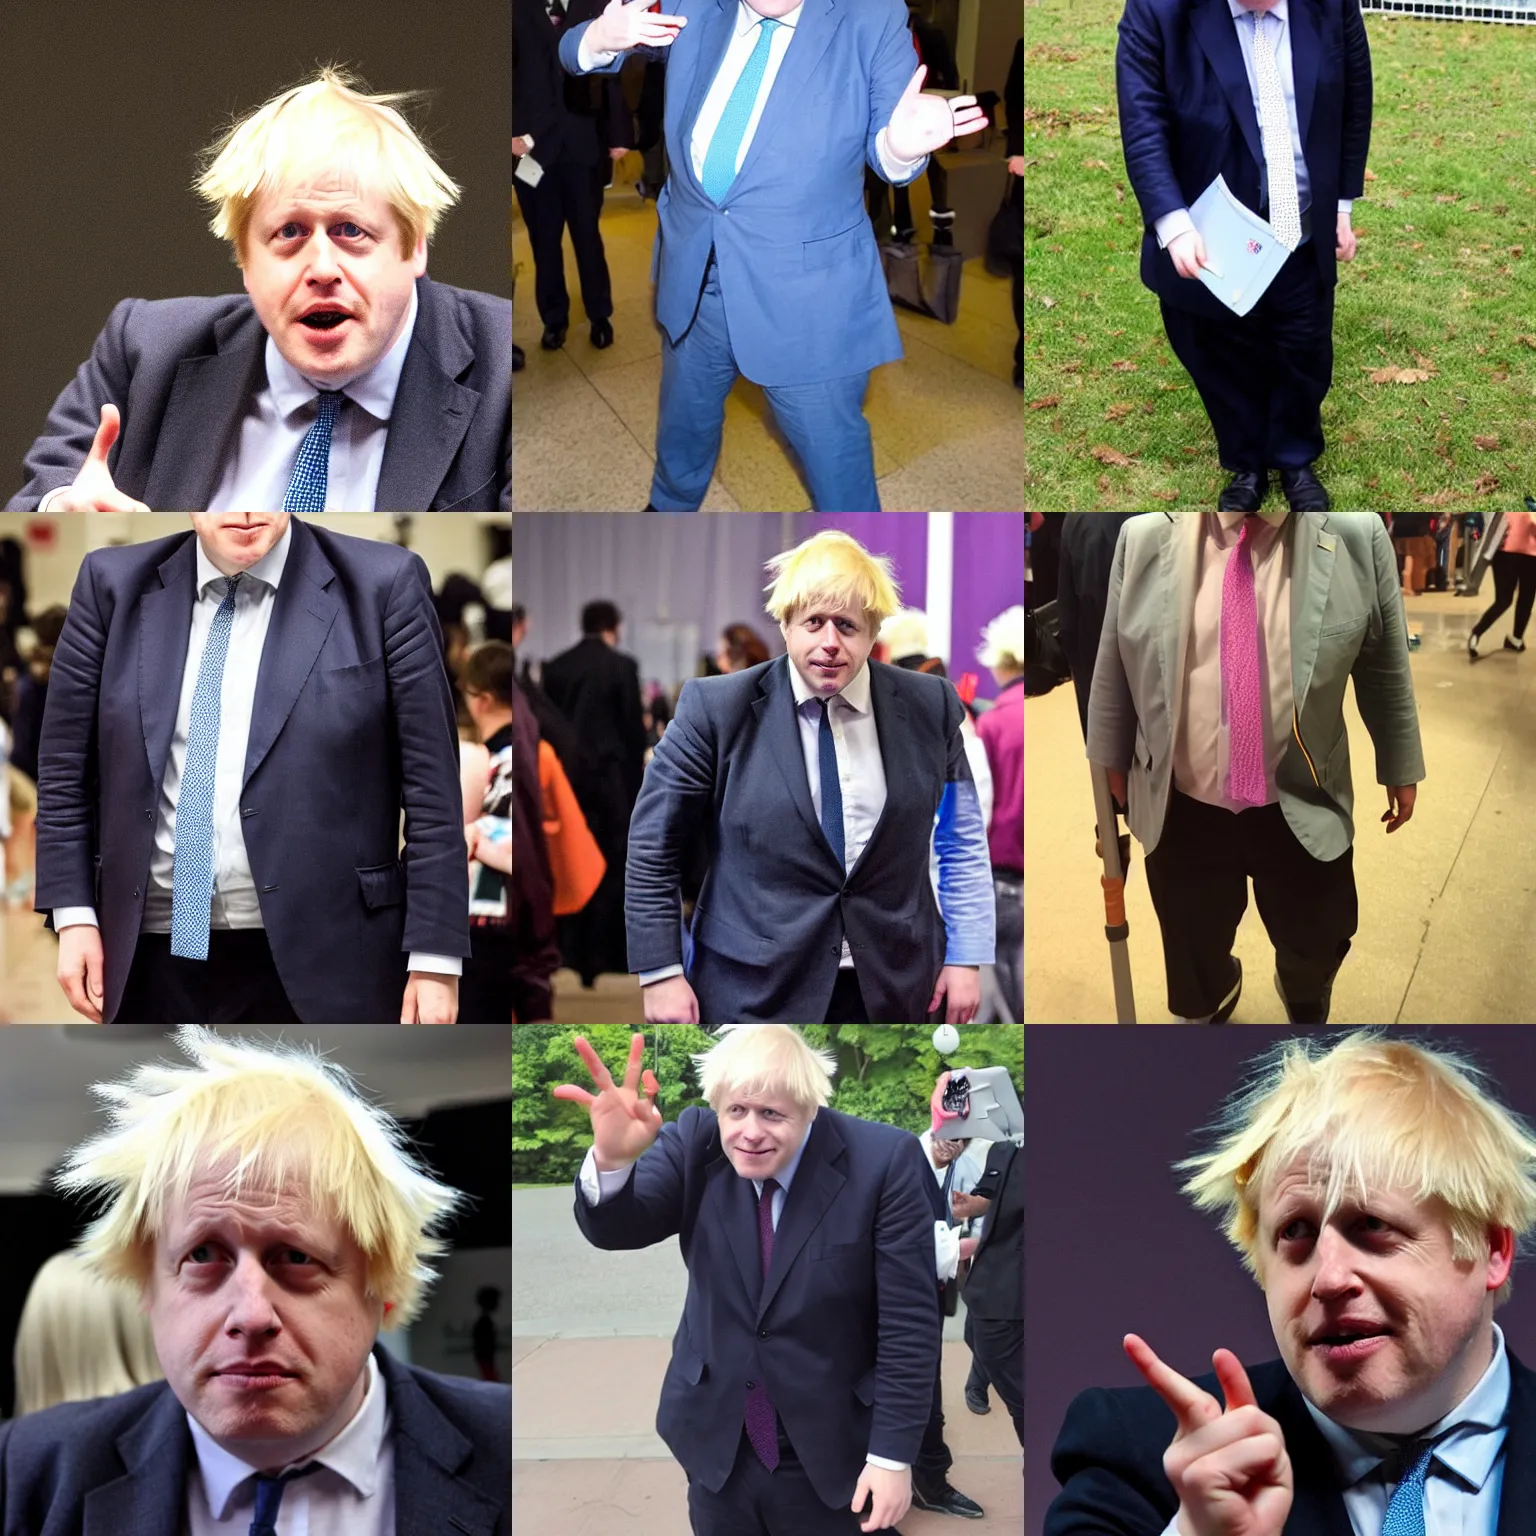 Prompt: boris johnson cosplaying at an anime convention